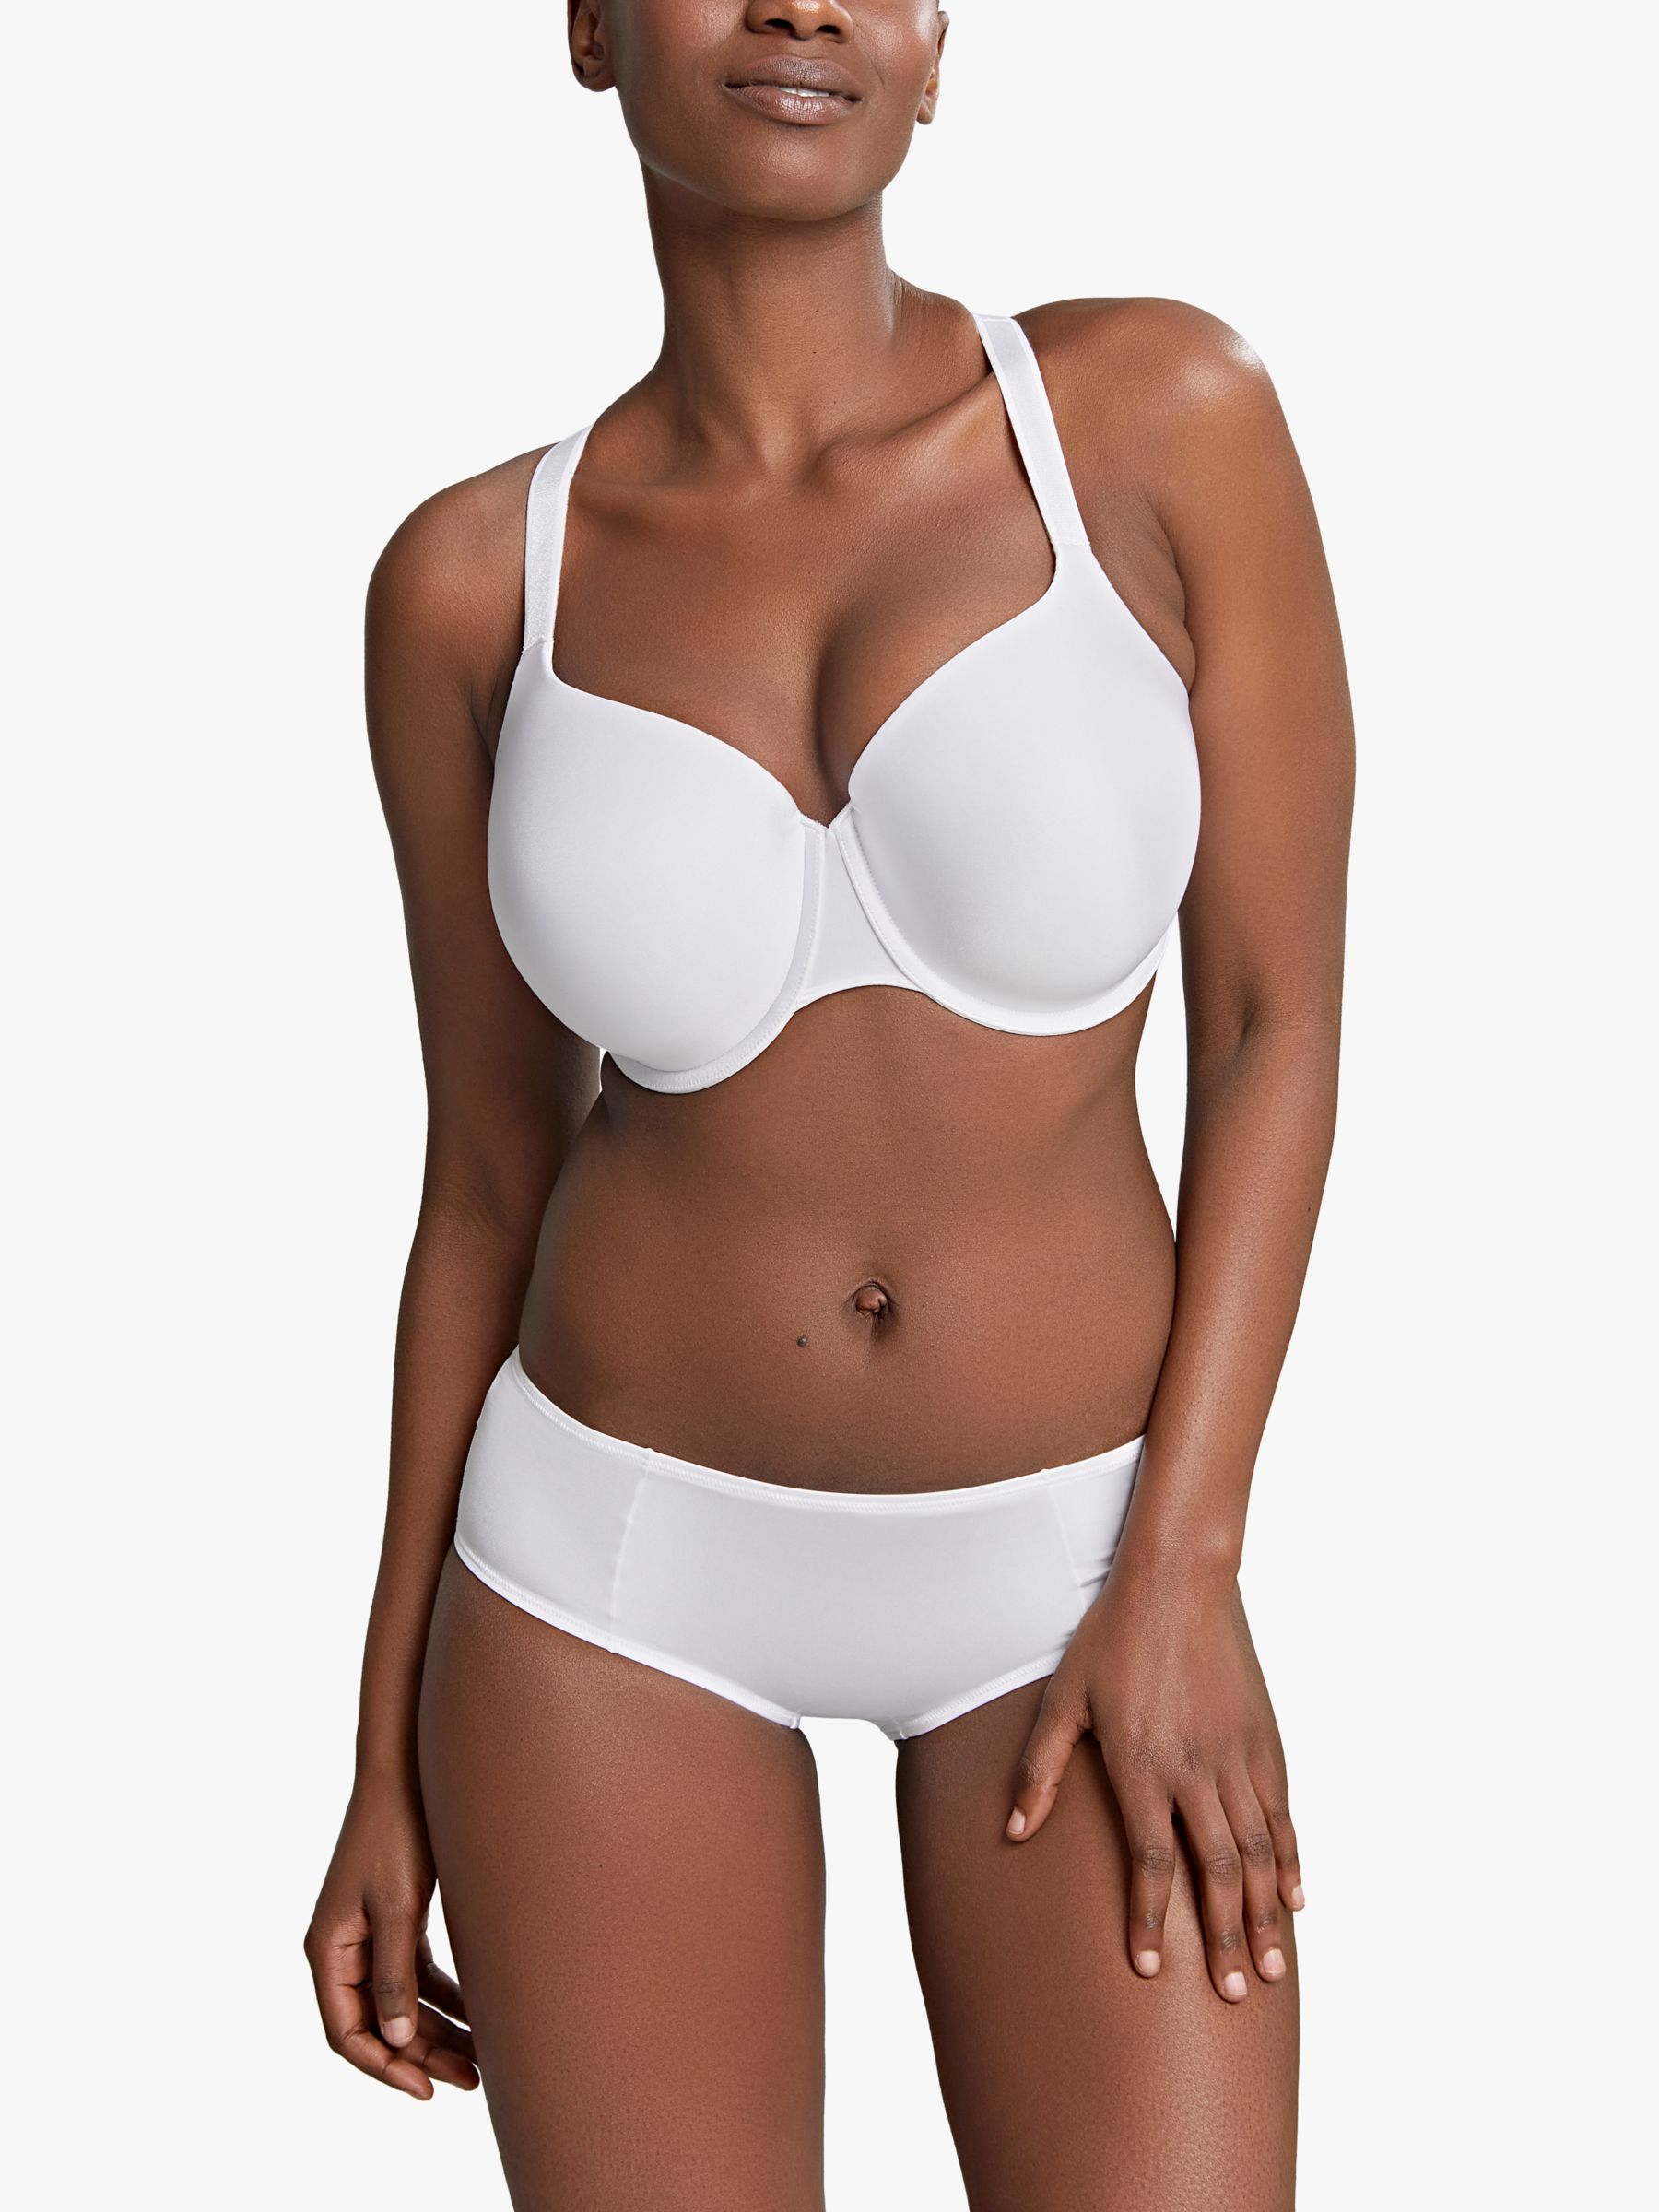 Panache Porcelain Elan T-Shirt Bra Review, Price and Features